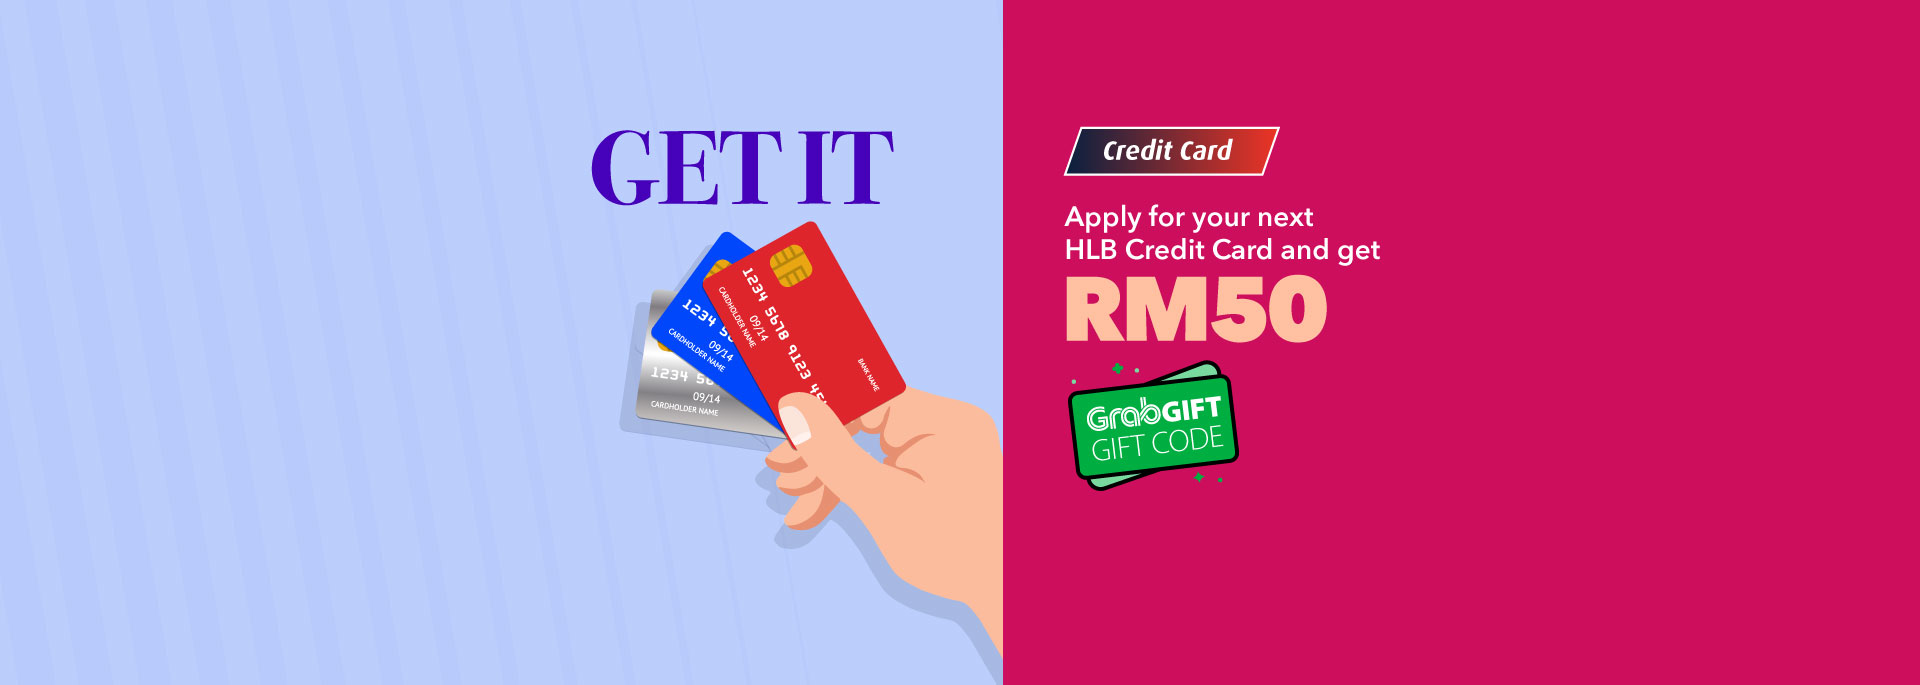 [Exclusively For You]: Be rewarded when you apply for any HLB Credit Card online